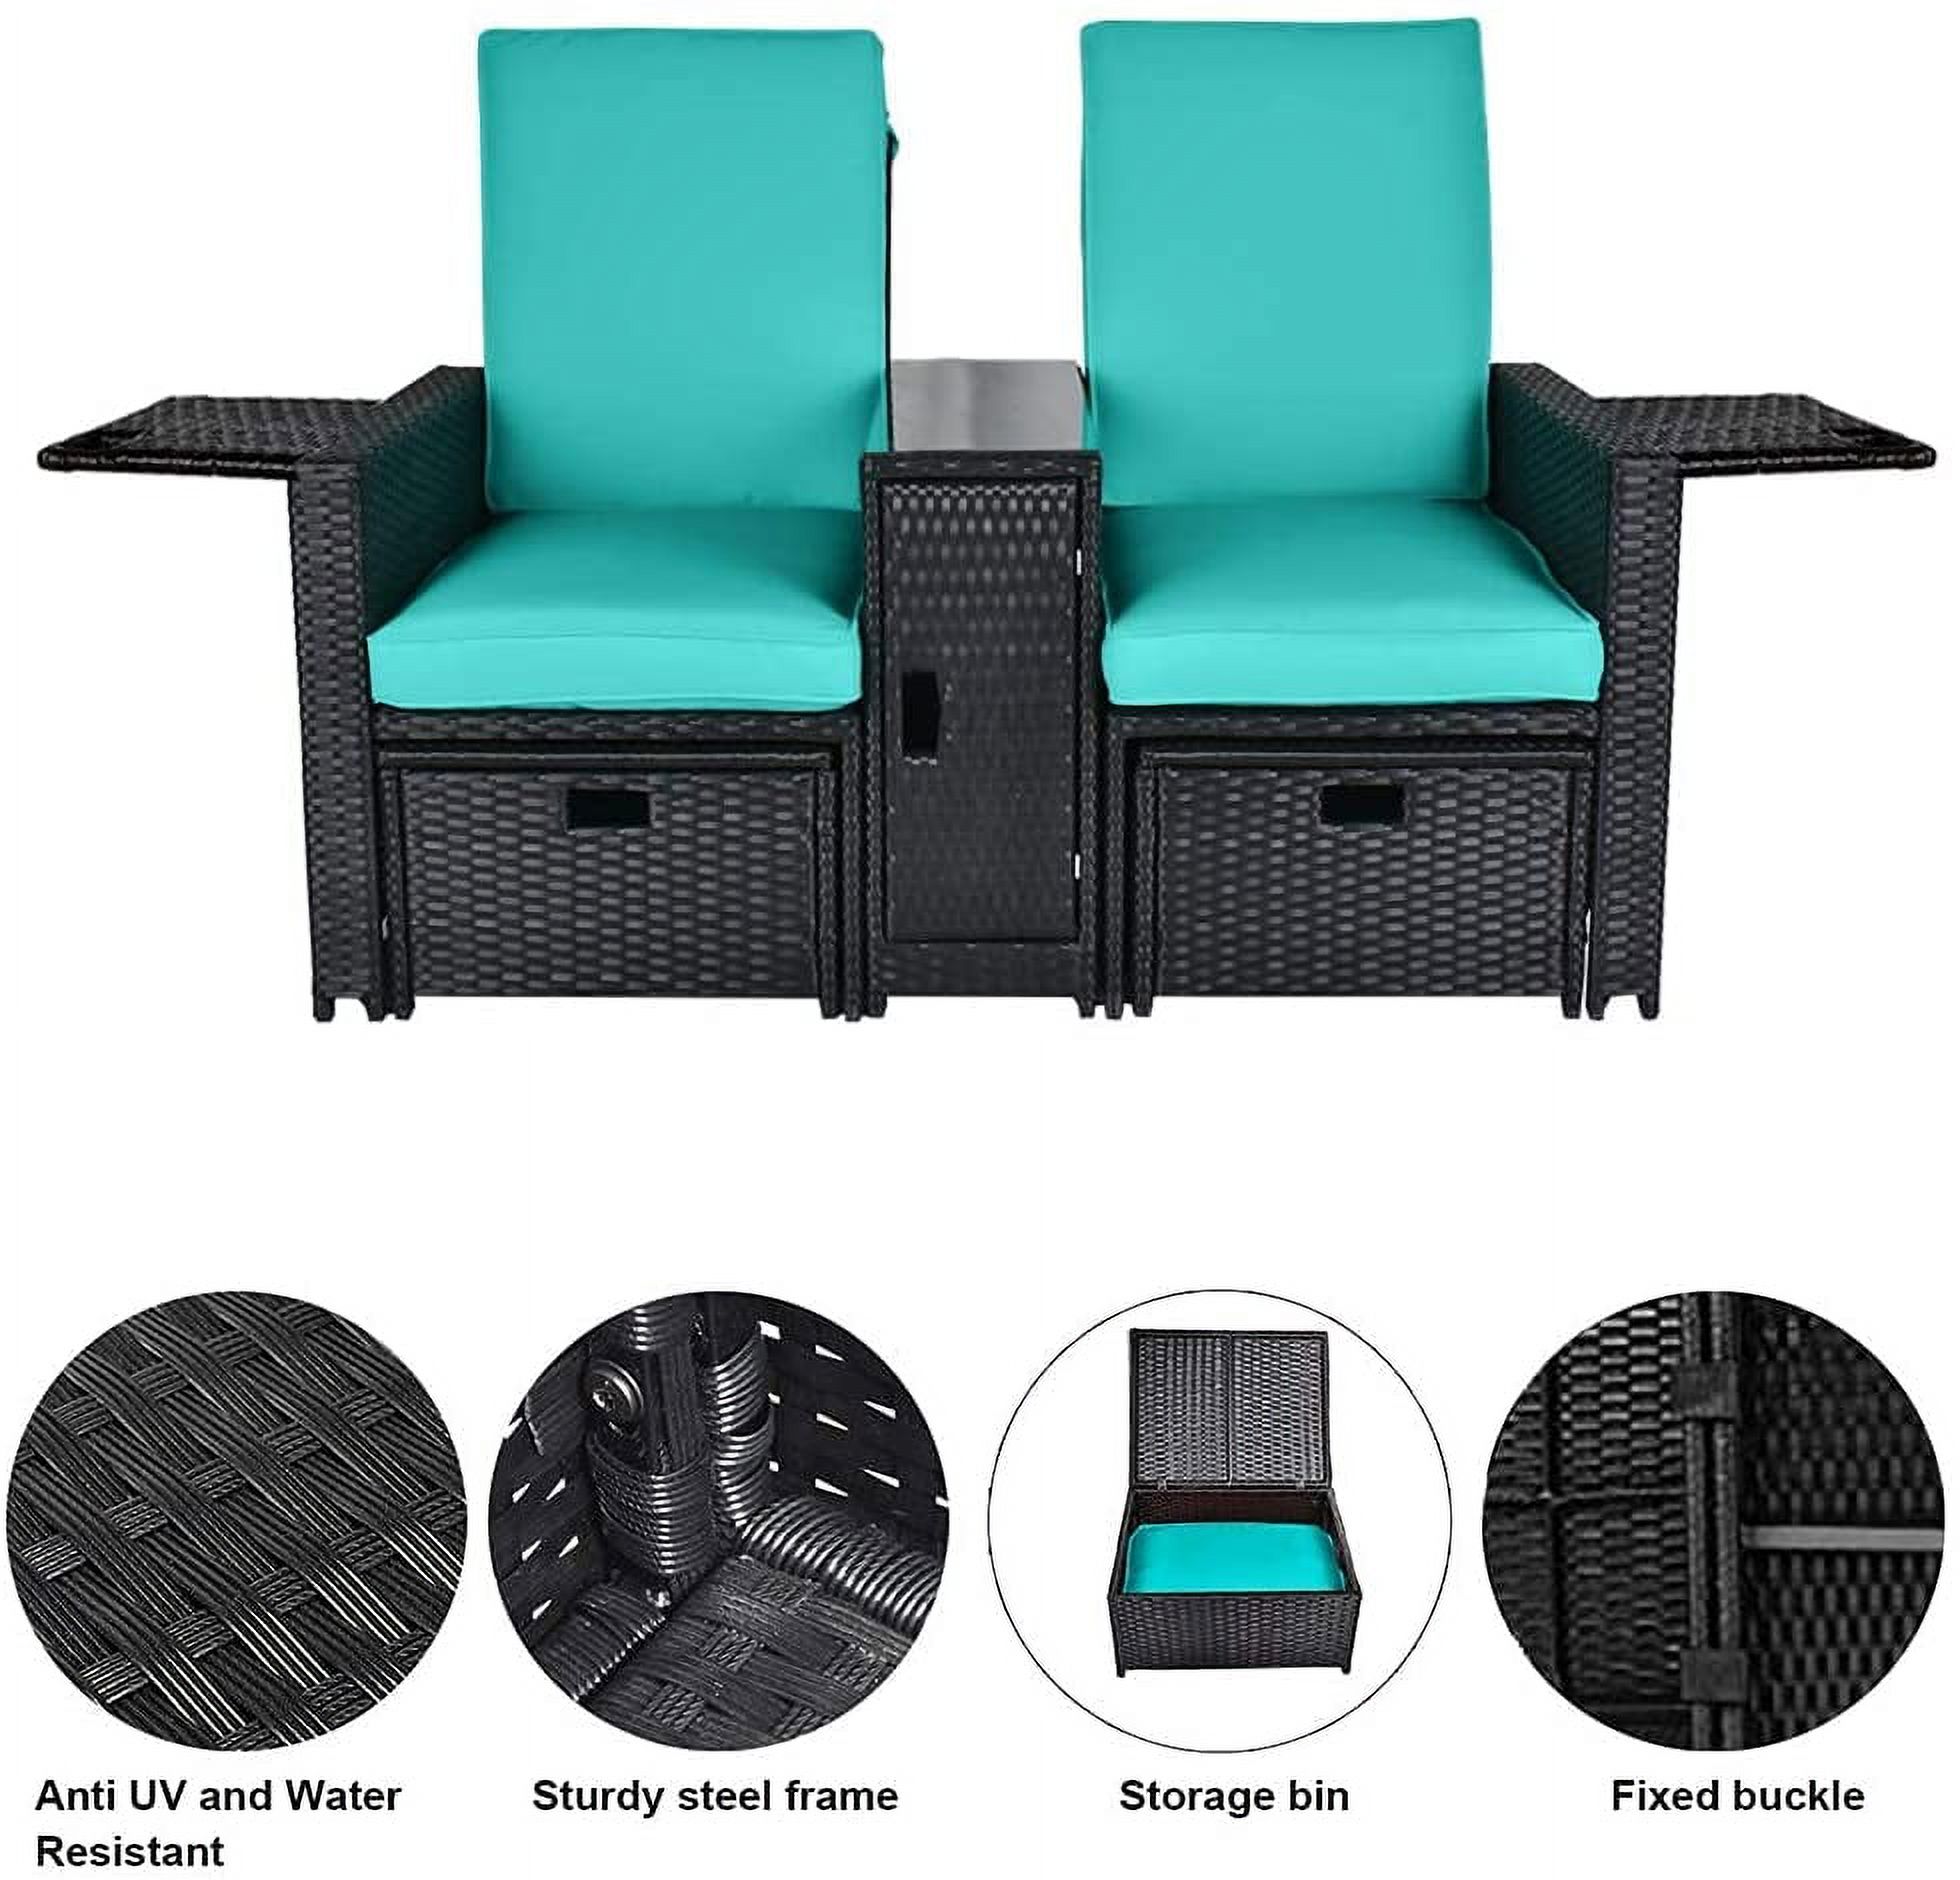 LVUYOYO 5pcs Patio Wicker Loveseat - Outdoor Rattan Sofa Set with Cushion - Adjustable Lounge Chair with Ottoman Footrest, Wicker Furniture for Garden, Patio, Balcony, Beach, Coffee Bar, Deck - image 5 of 8